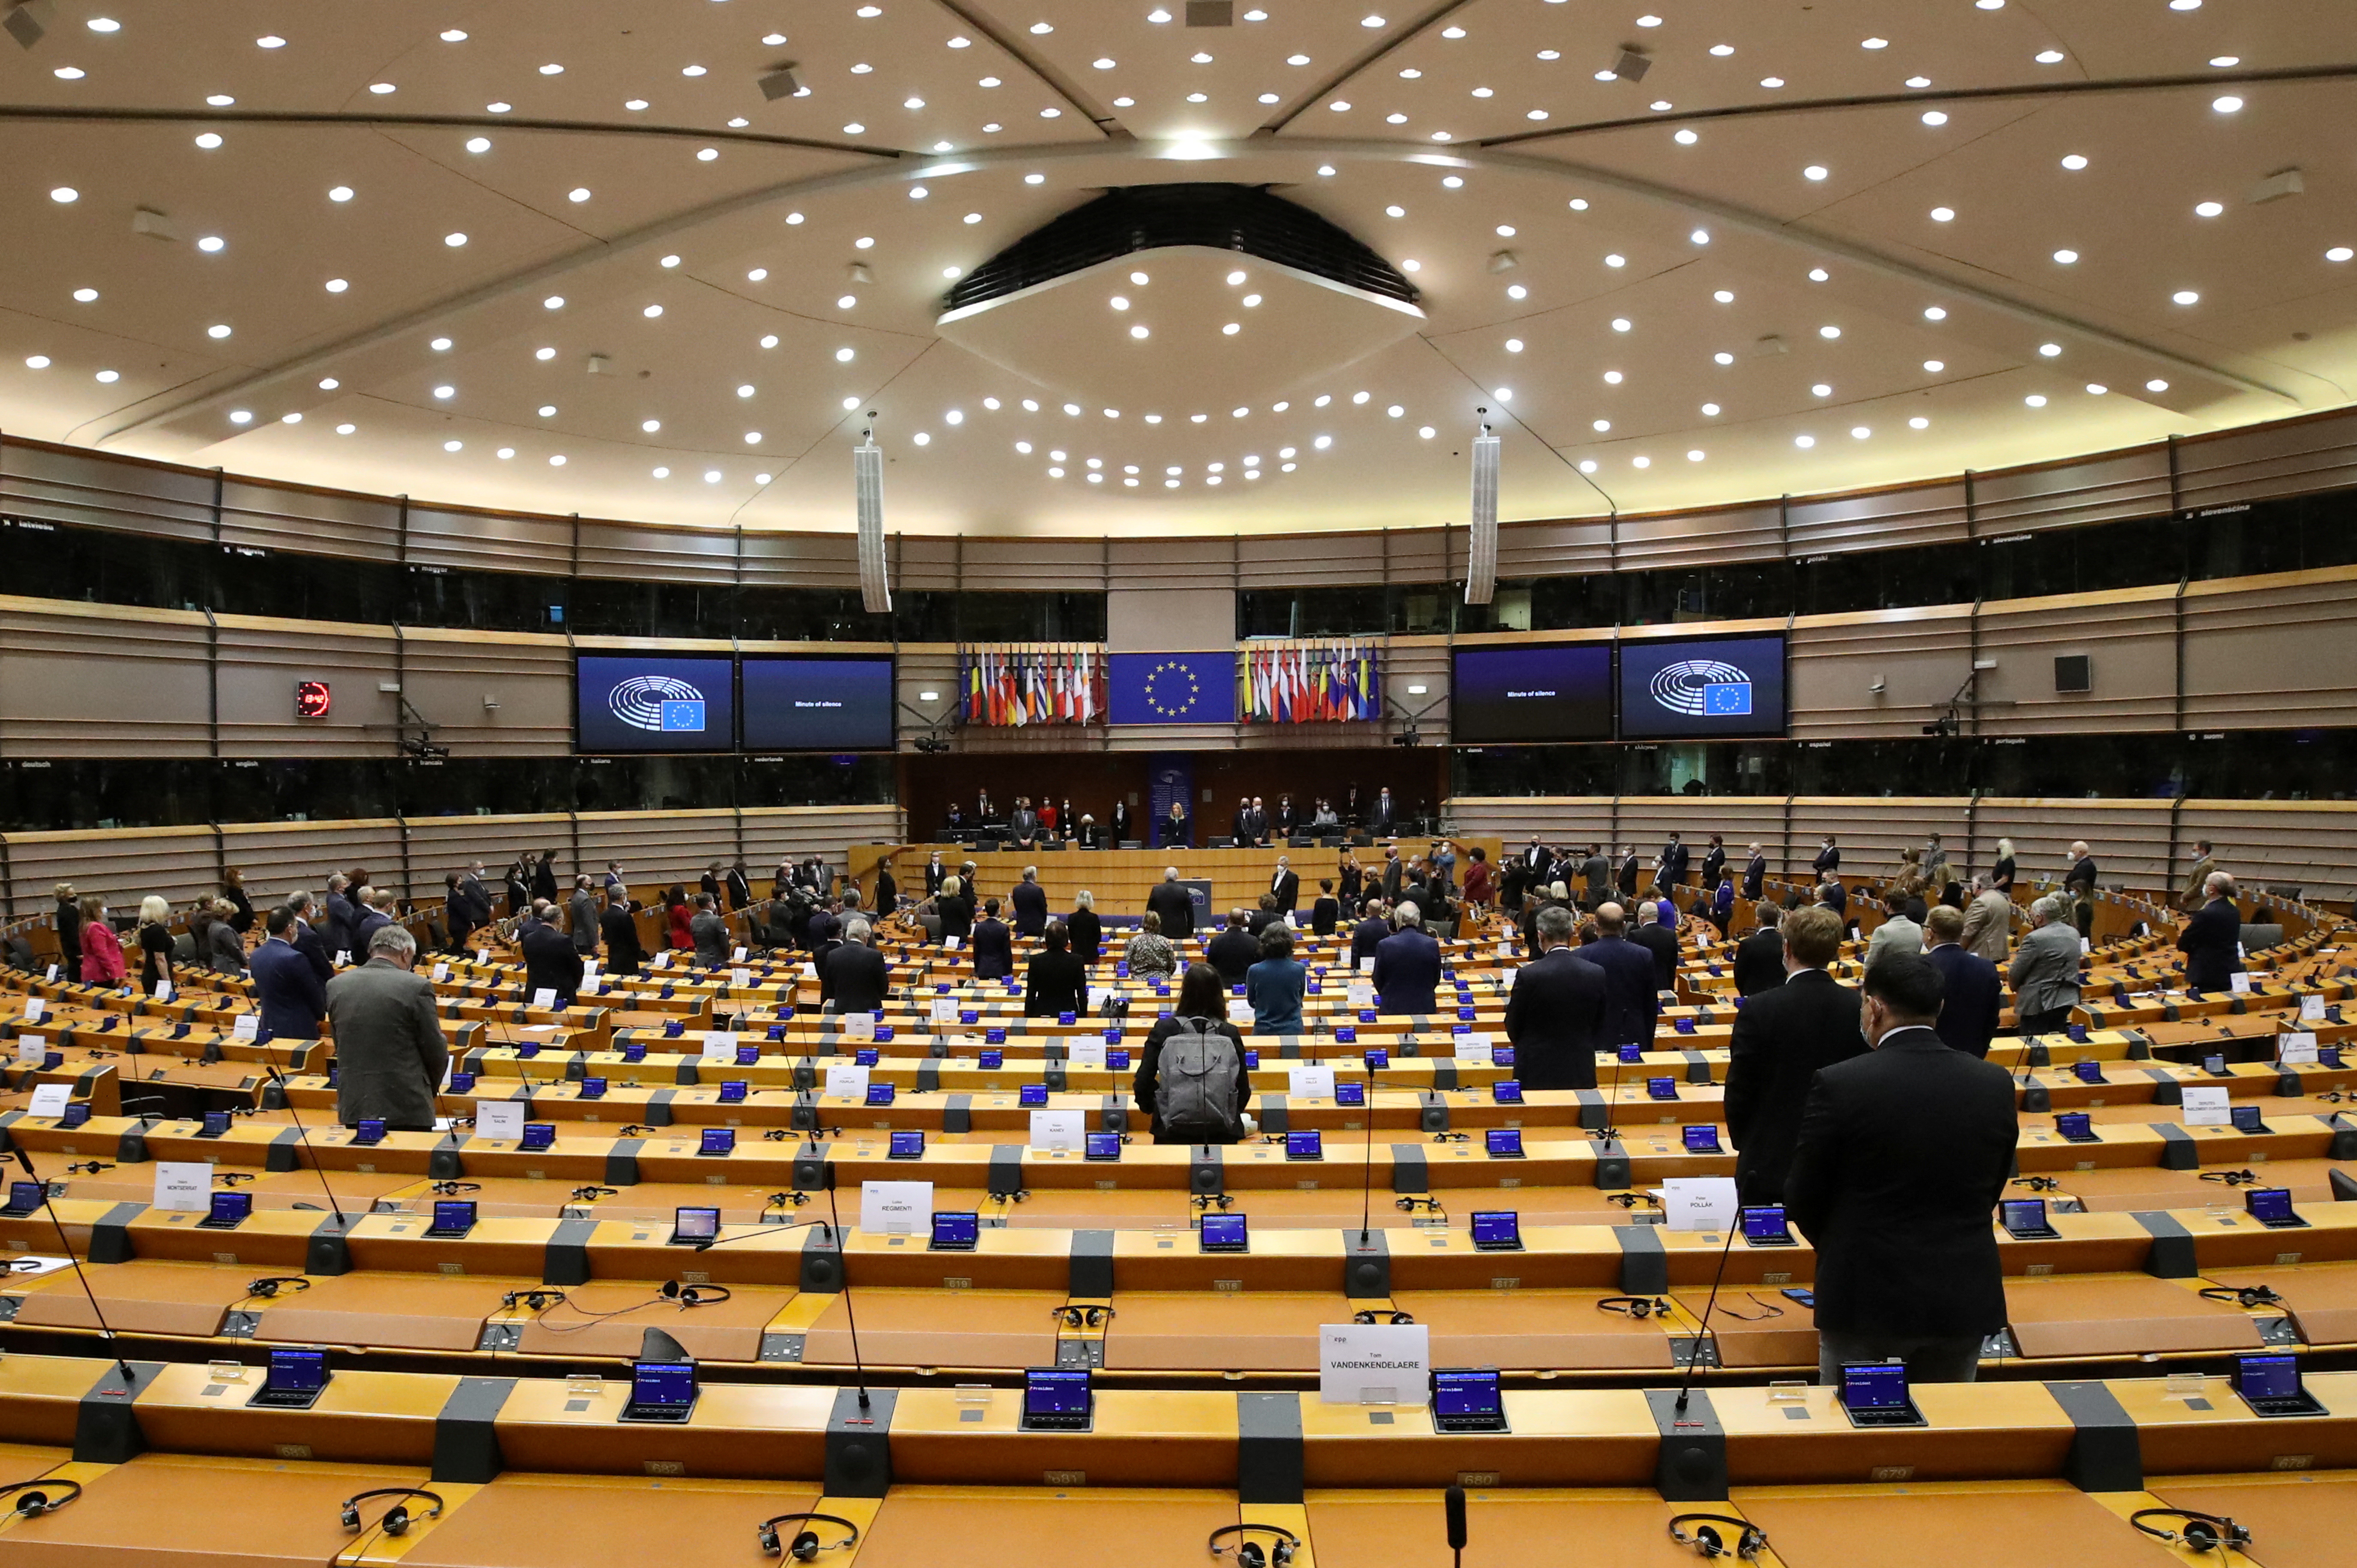 Special plenary session to mark Holocaust Memorial Day, in Brussels